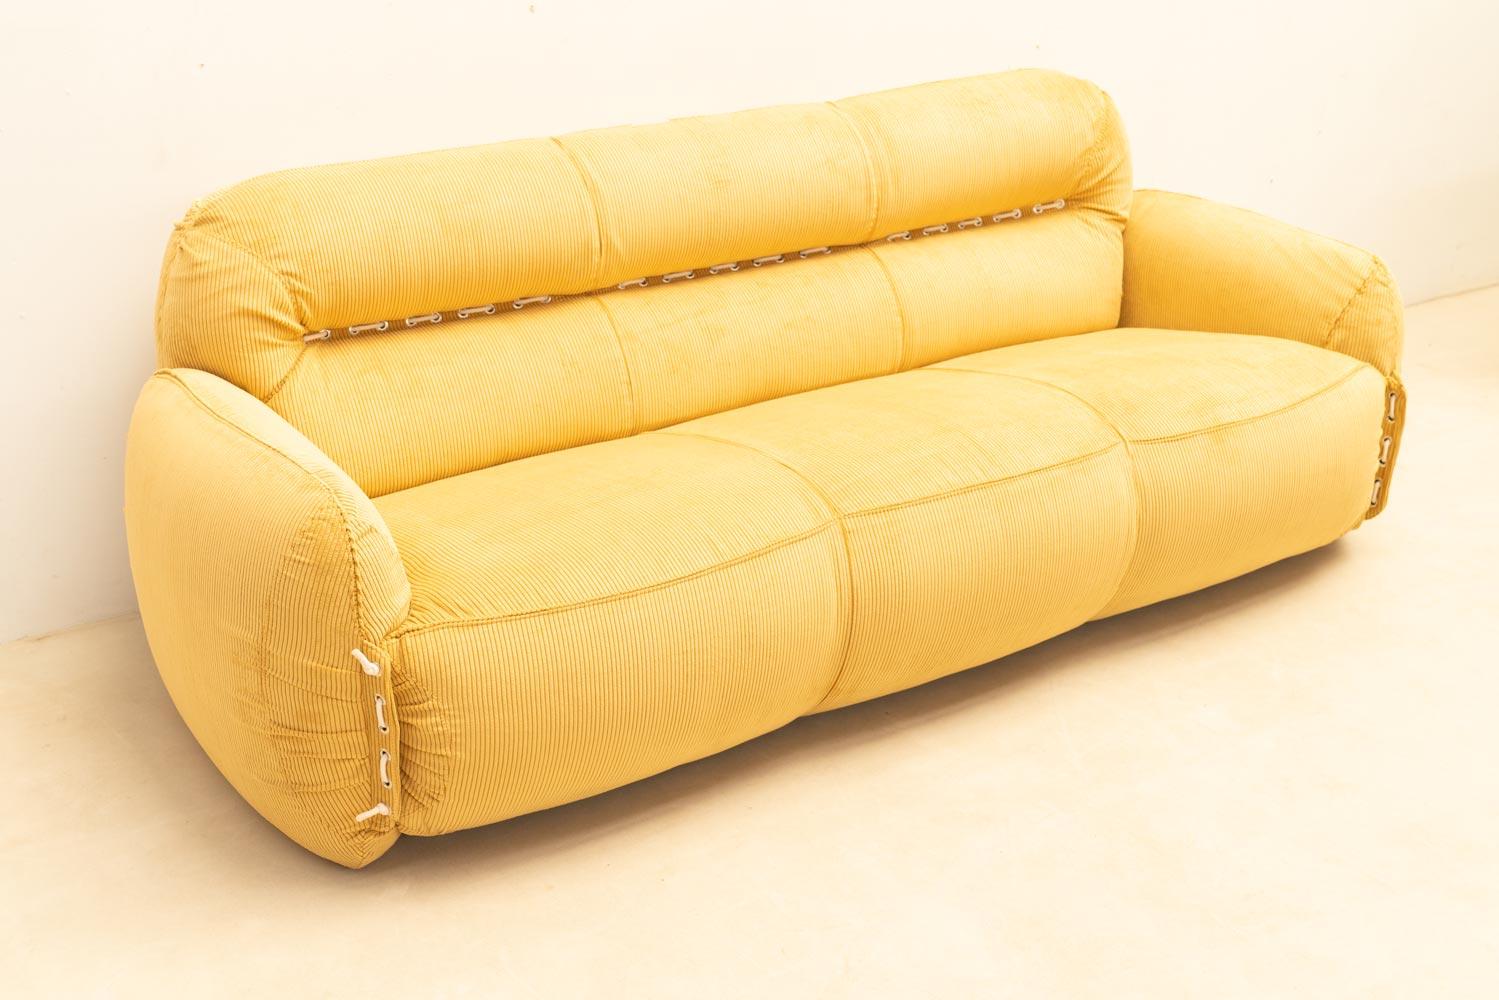 A very comfortable design with eye-catching colors. This 1970s Italian sofa has been recently upholstered in vibrant yellow corduroy. Its generous shape invites you to sit and lounge, offering ultimate comfort. Rope detailing along the armrests and